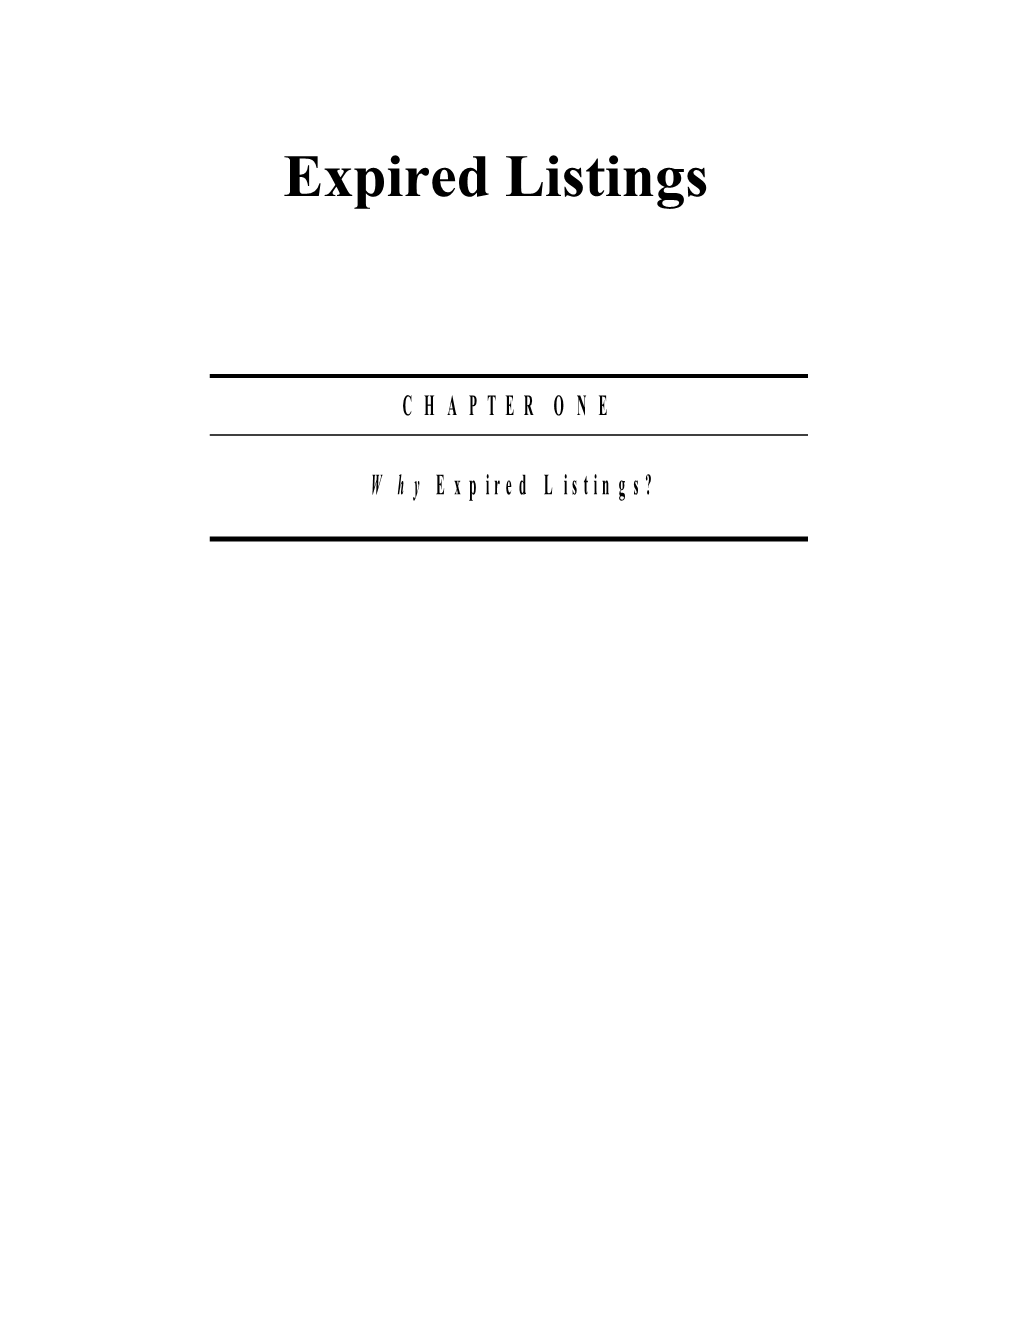 Expired Listing Are a Highly Visible Source of Leads